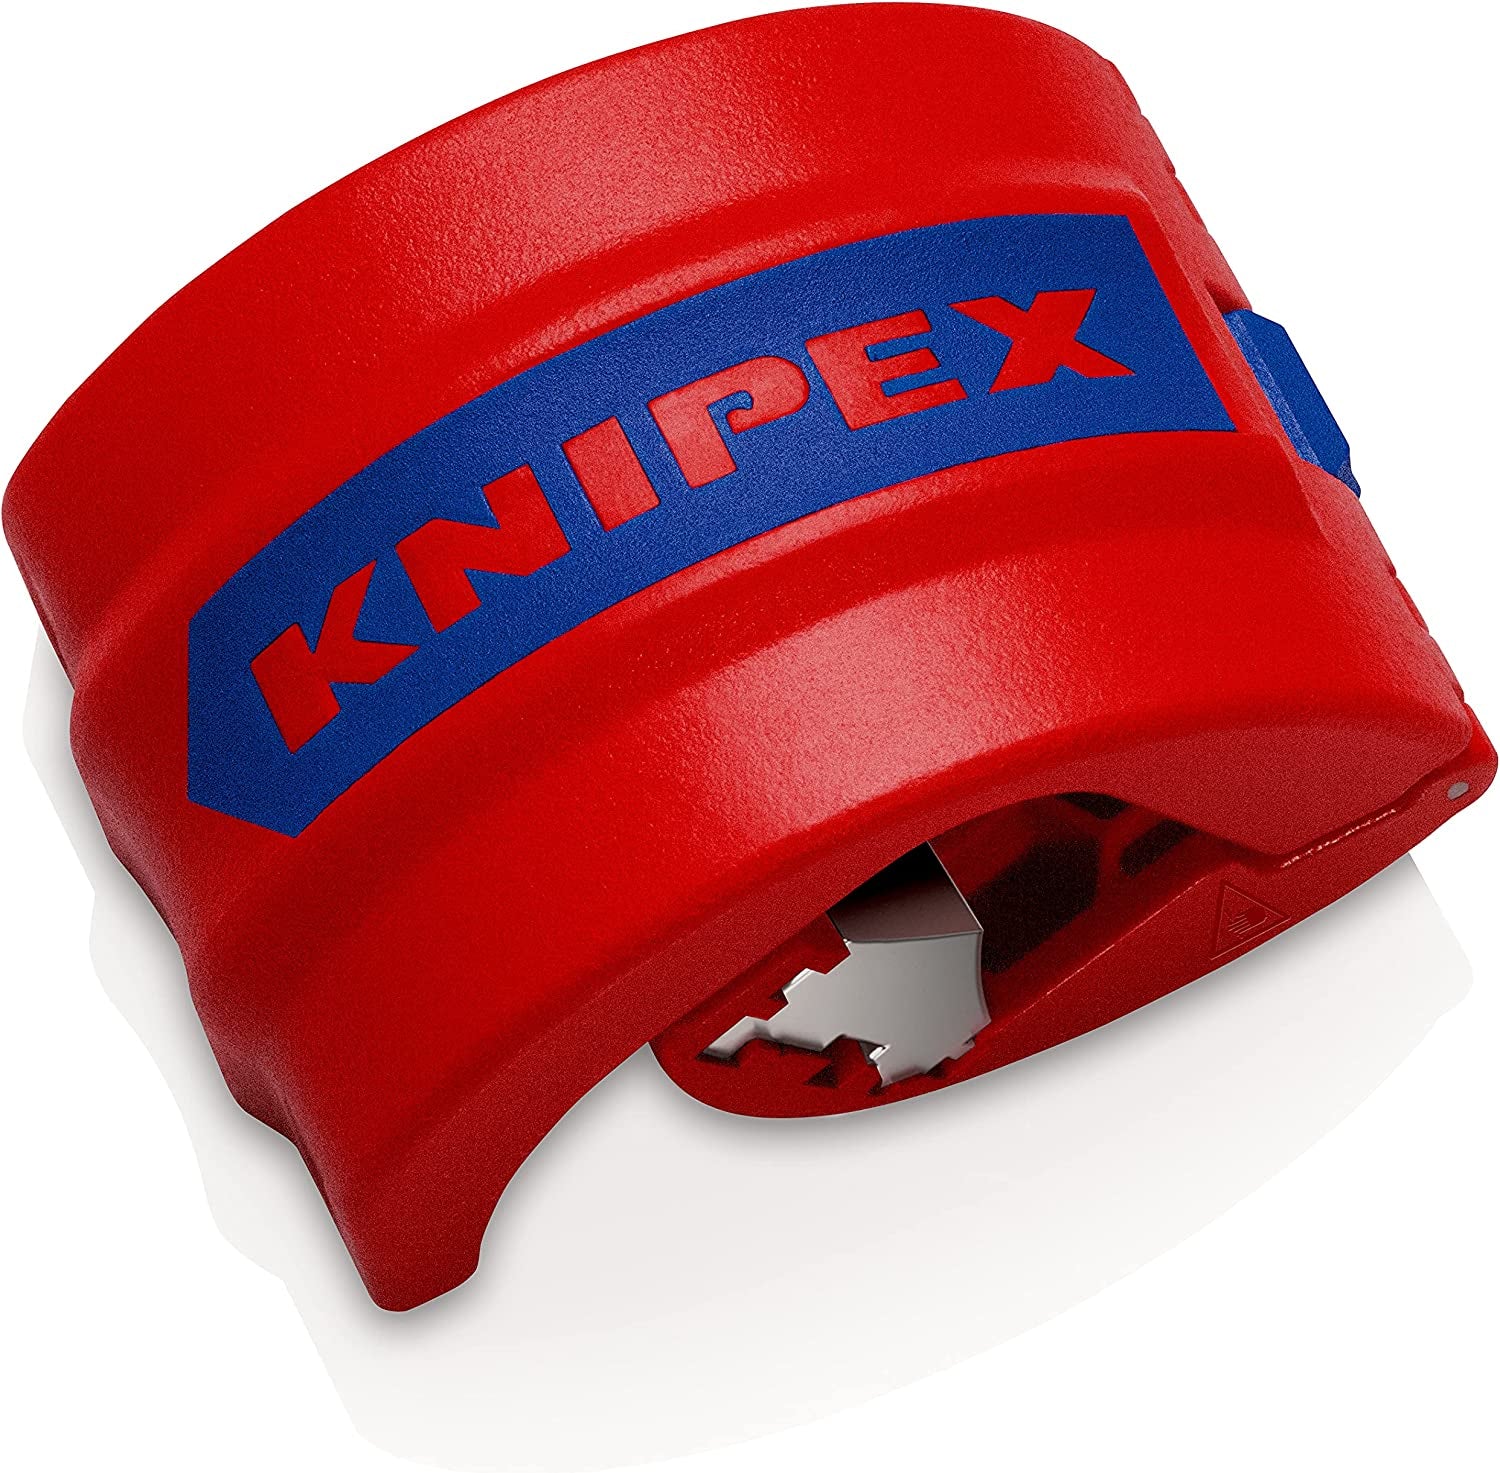 KNIPEX, KNIPEX Bix Cutters for Plastic Pipes and Sealing Sleeves Ø20-Ø50 Mm, 90 22 10 BK